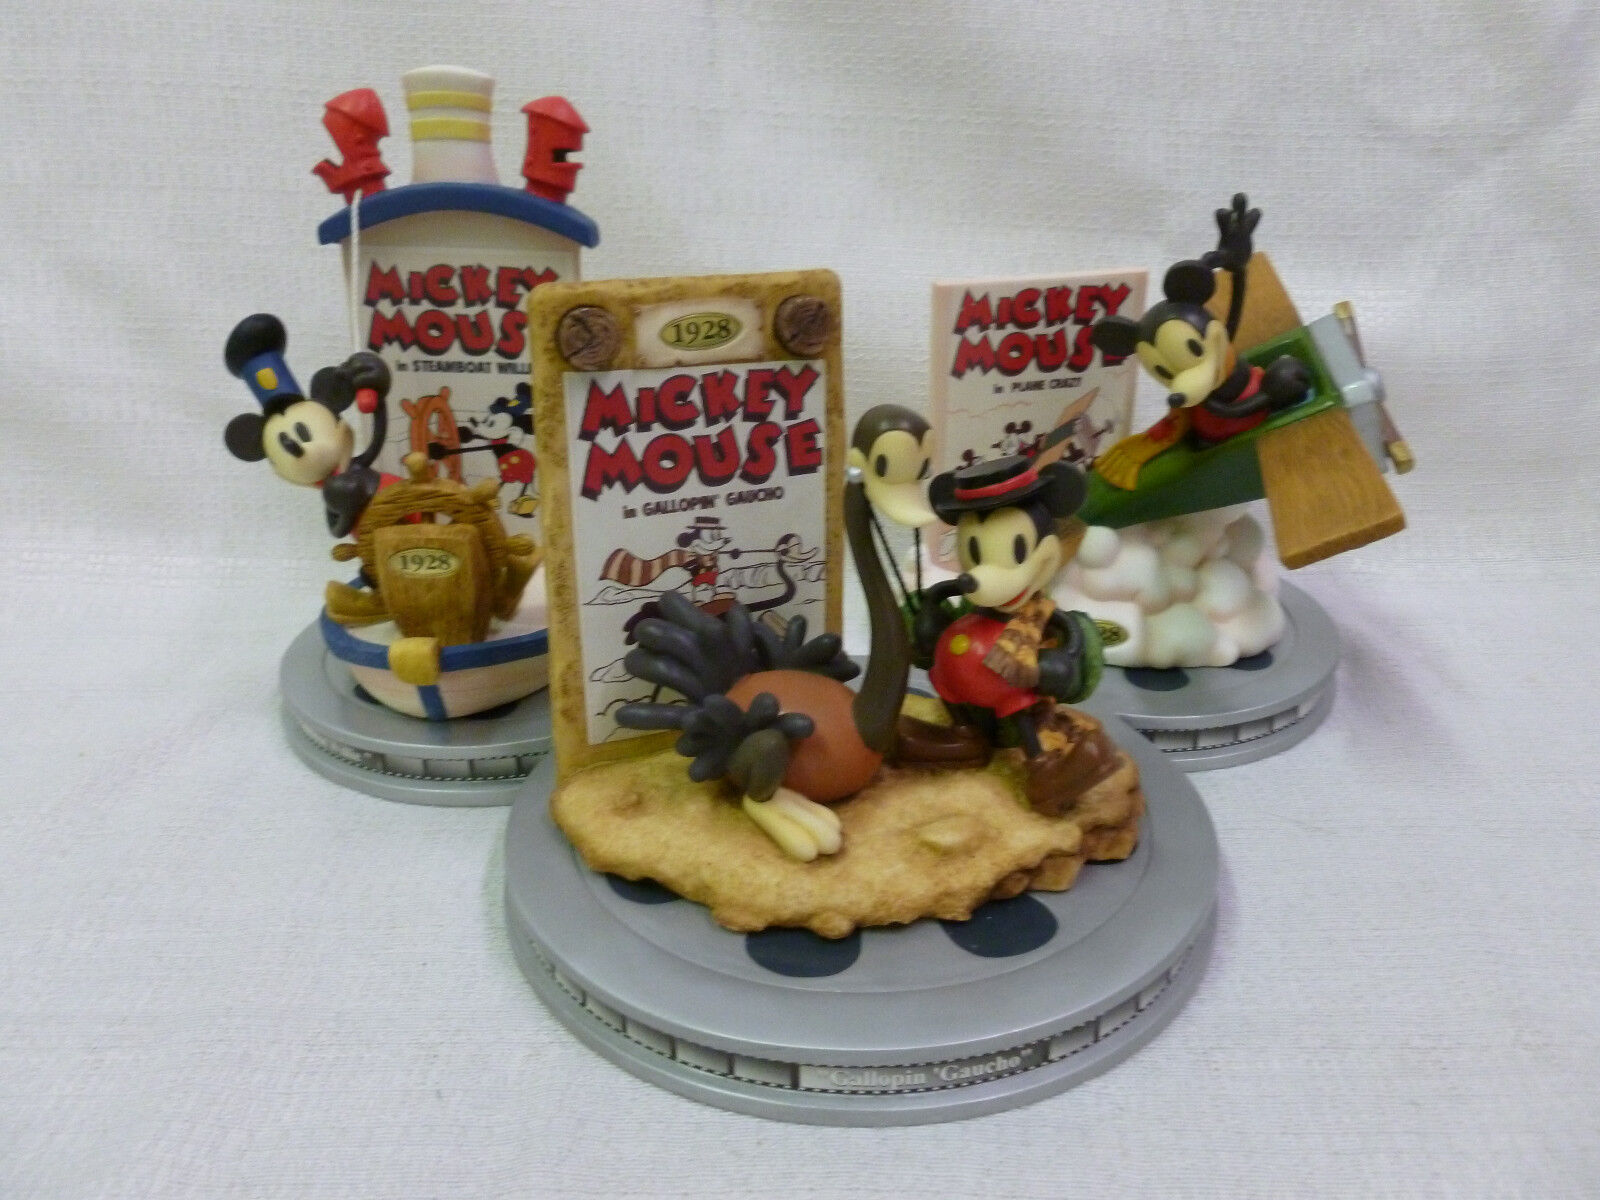 1928 The Best of Mickey Mouse Set Gallopin Gaucho Steamboat Willie Plane Crazy